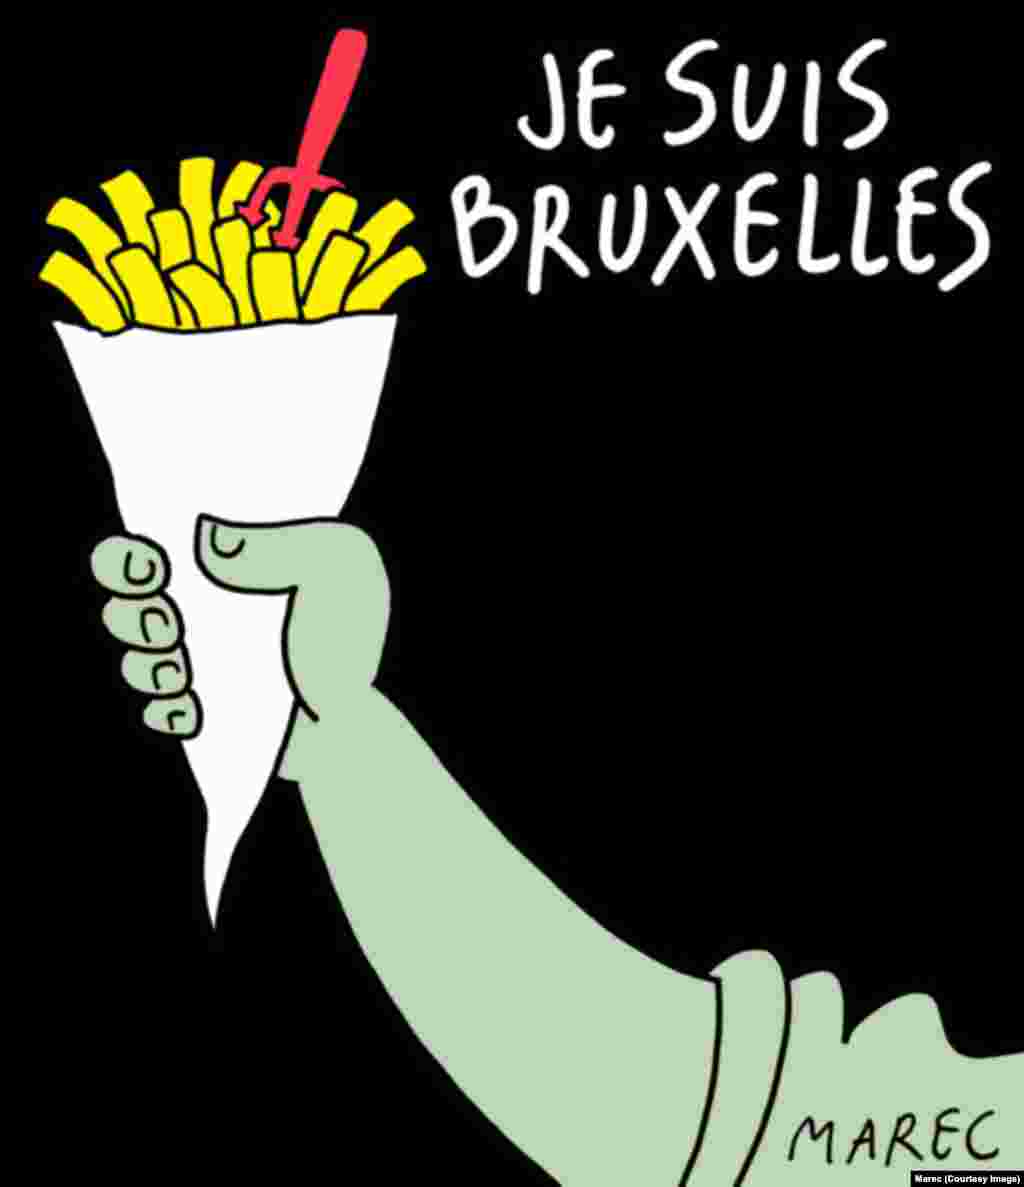 Another image referencing &quot;pommes frites&quot; and the Je Suis Bruxelles (&quot;I am Brussels&quot;) meme. (Social-media generated content. This cartoon by Marec in Het Nieuwsblad.)